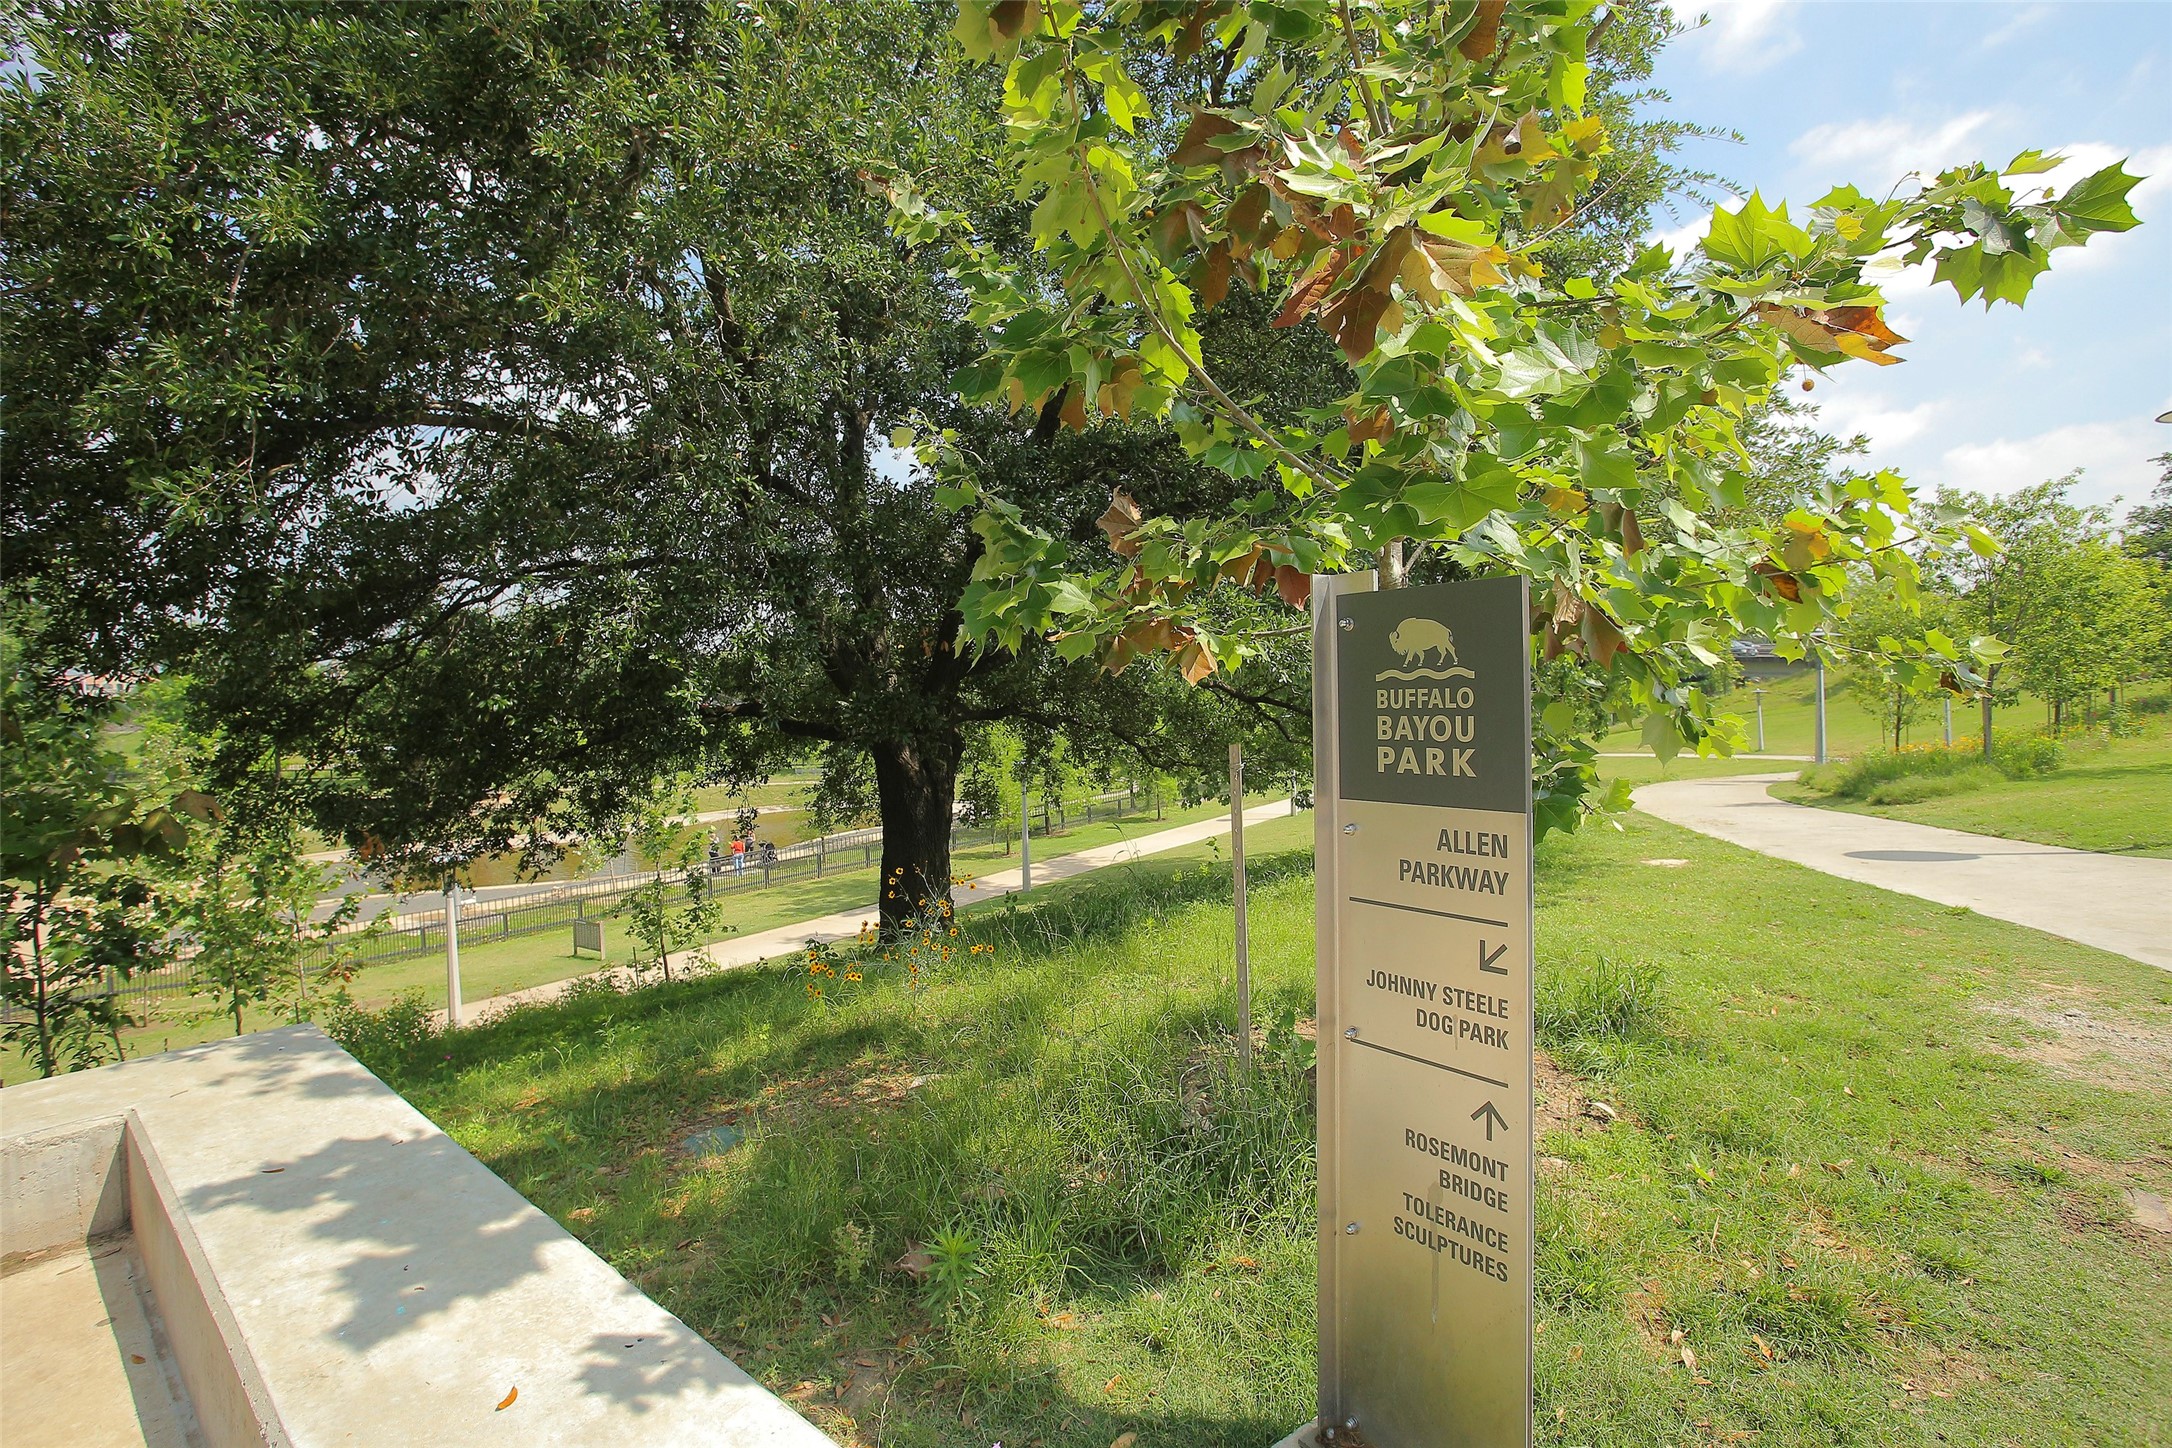 From the Bike Trail which is just steps away, the Buffalo Bayou Park System can also be accessed to the east.  Memorial Park has many sub-parks, including the 160-acre Buffalo Bayou Park, one of the country's great urban green spaces.